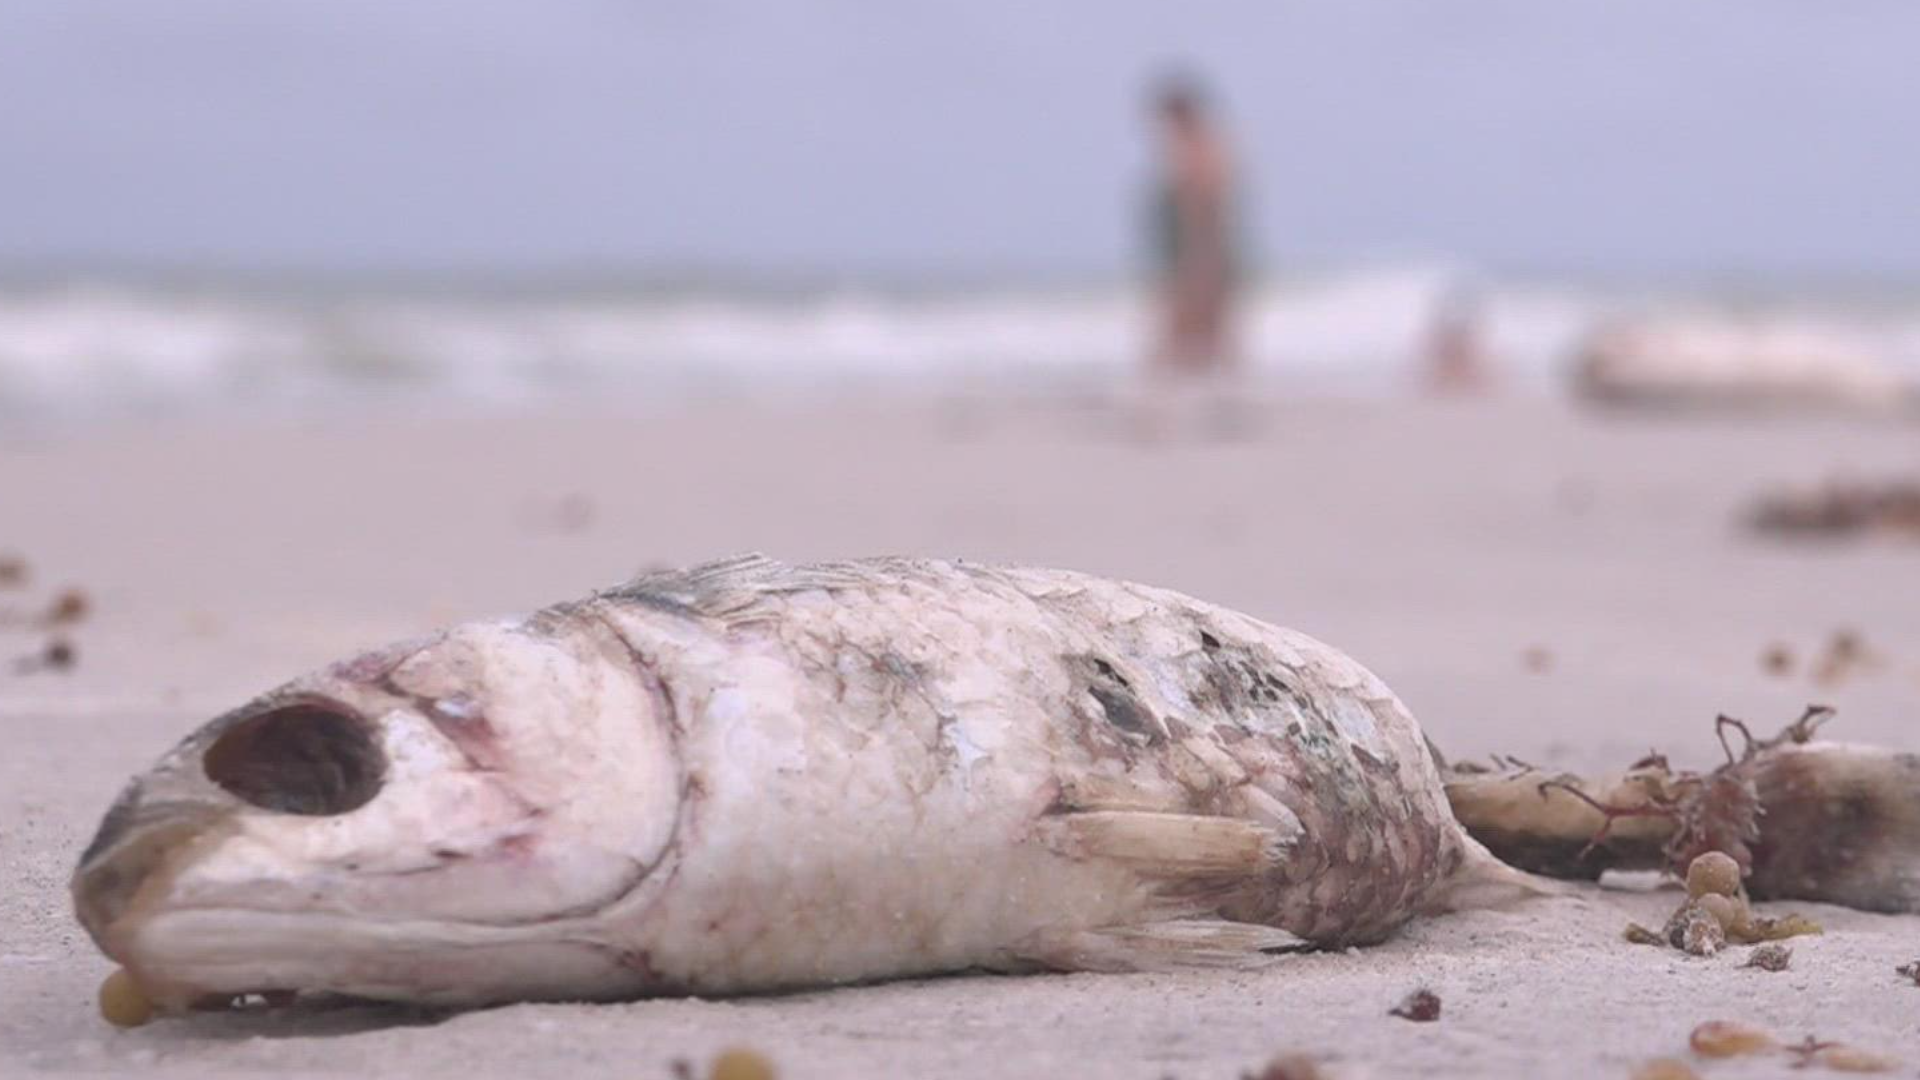 A study led by Florida Gulf Coast University measures the environmental and economic benefits of removing dead fish killed by red tide.